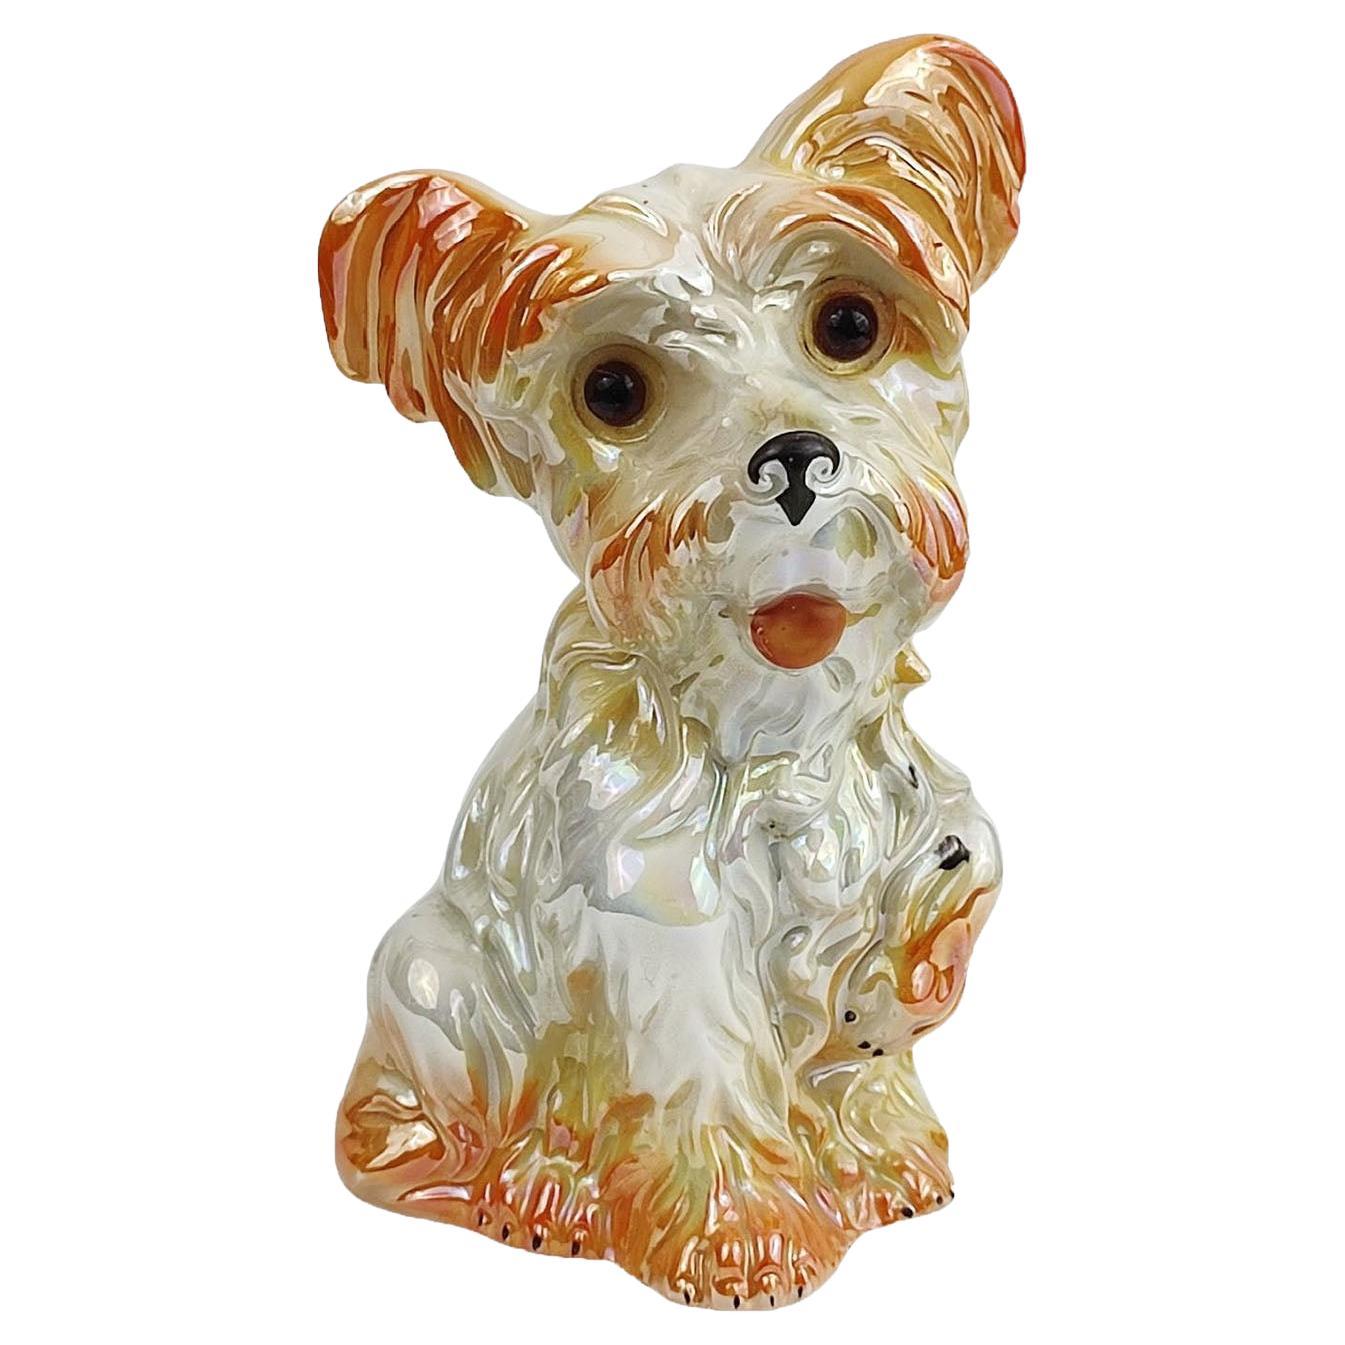 Dog-Shaped Perfume Lamp from Carl Scheidig Gräfenthal, Germany, 1930s